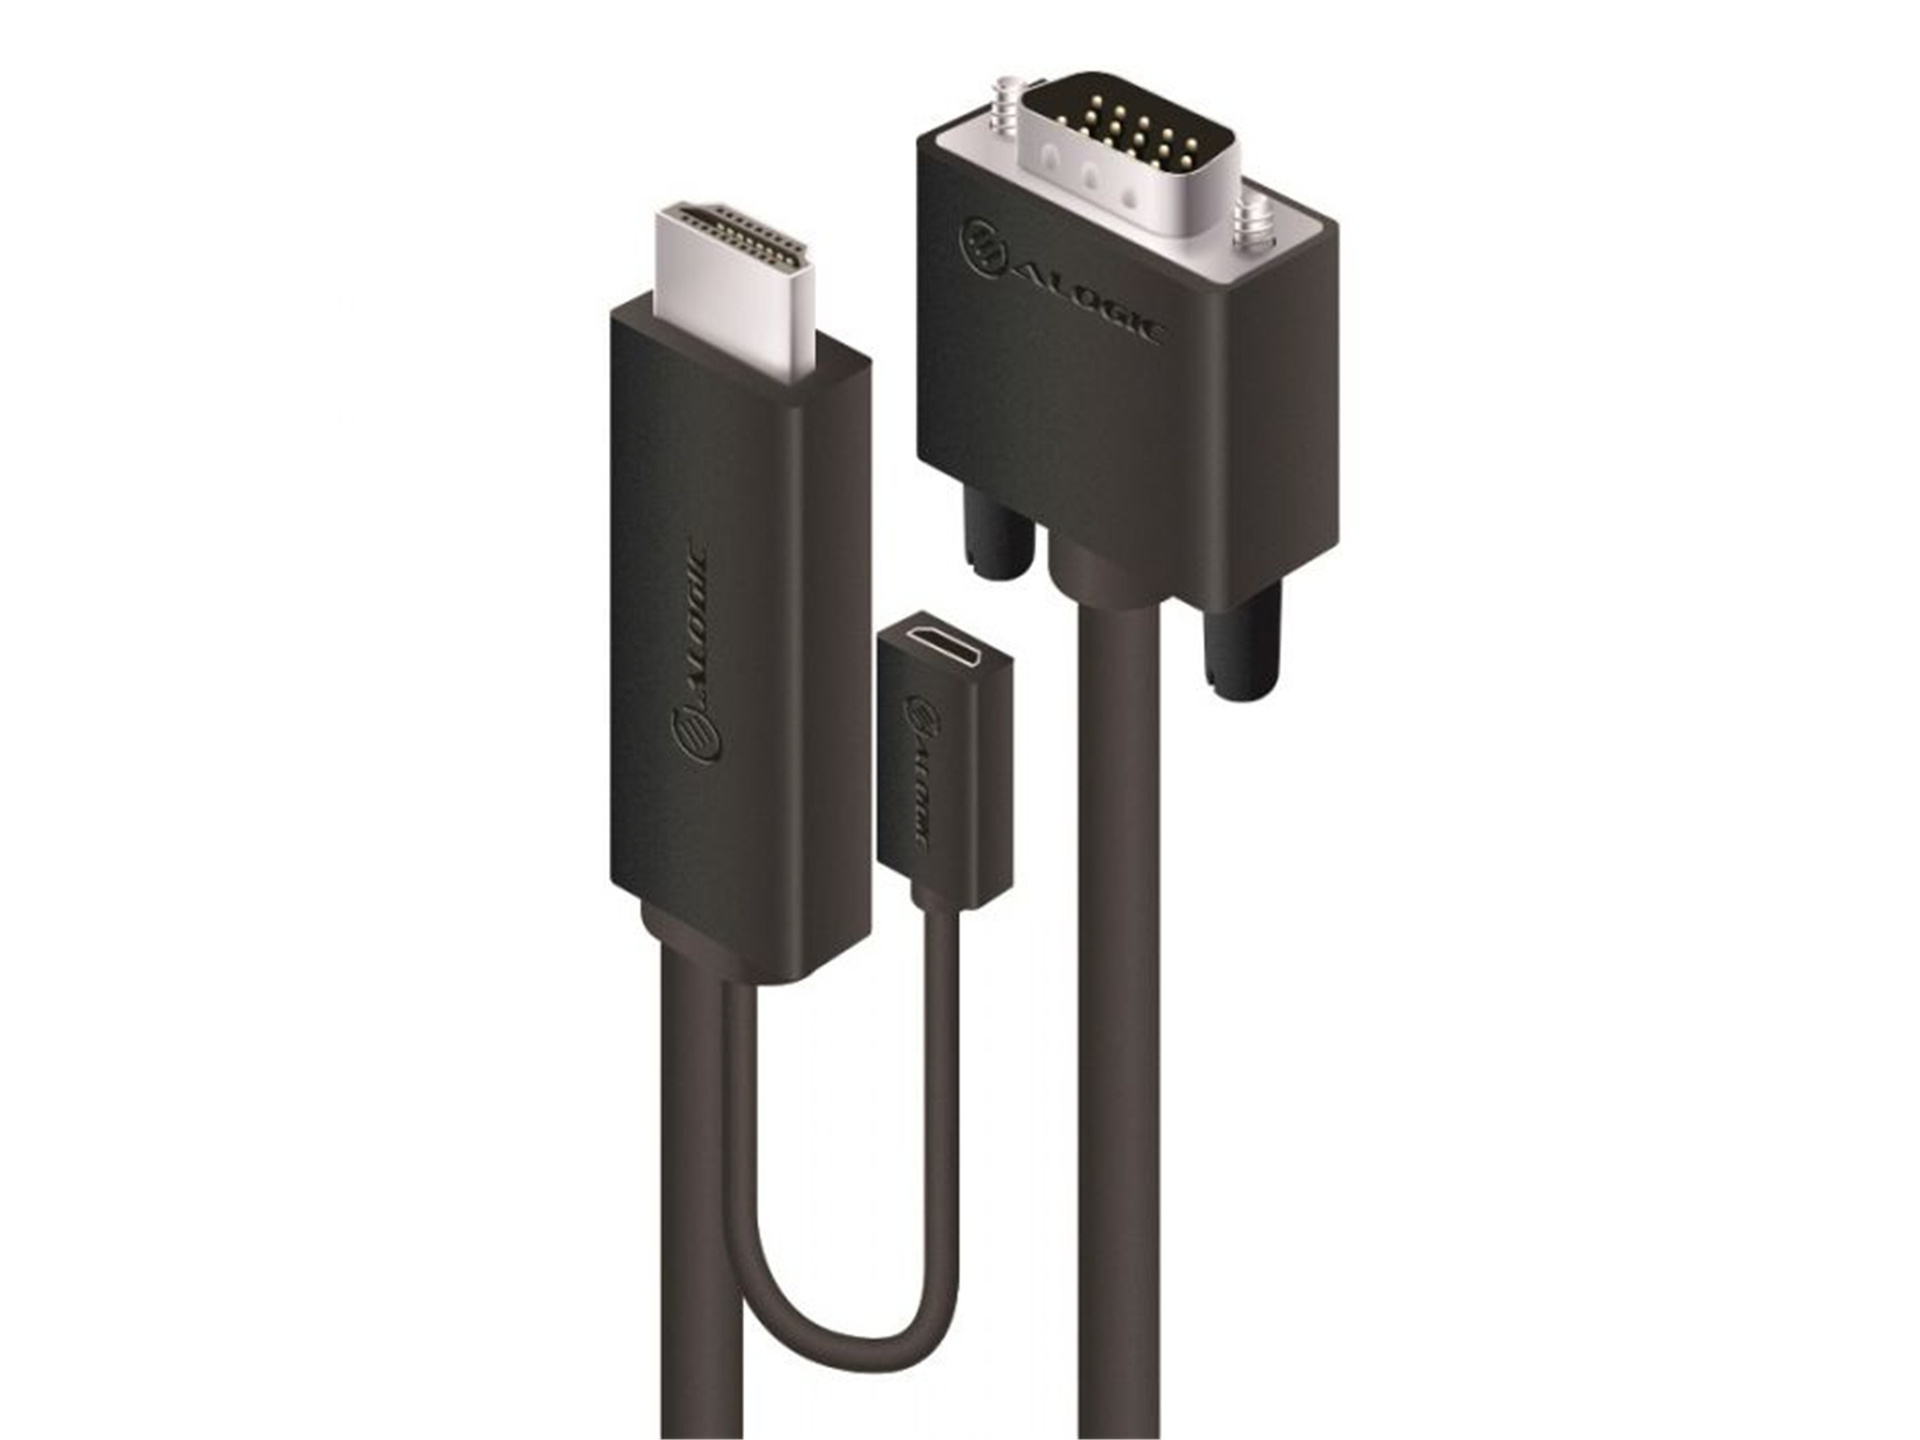 Alogic SmartConnect HDMI to VGA Cable with USB Power (2m)